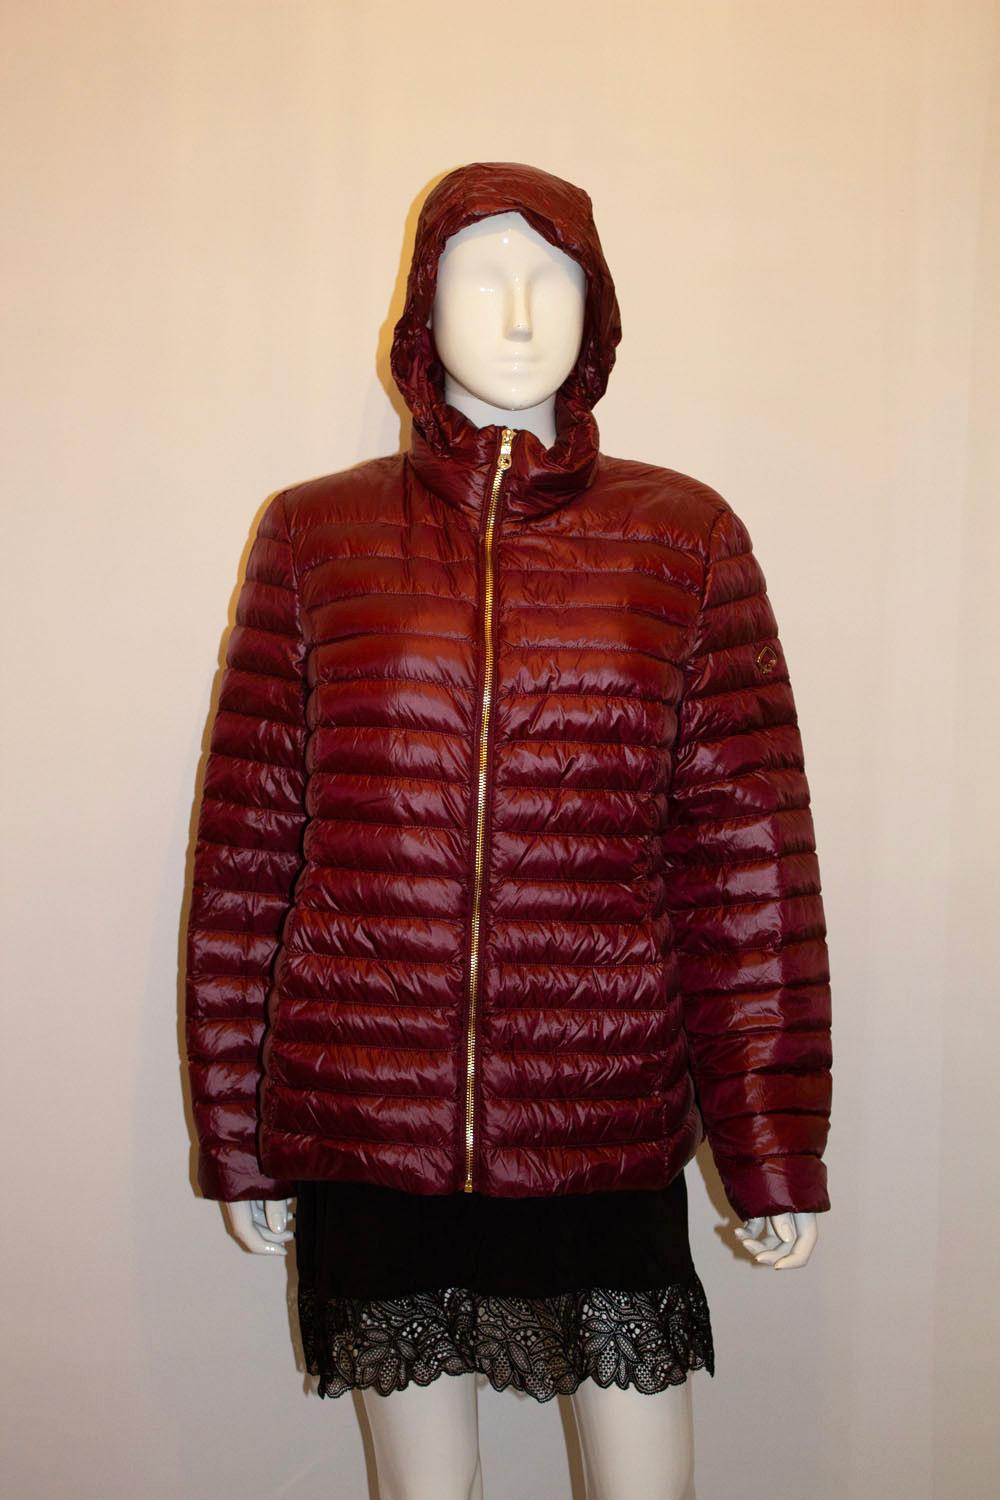 Kate Spade Burgundy Puffa Jacket with Hood in Collar In Good Condition For Sale In London, GB